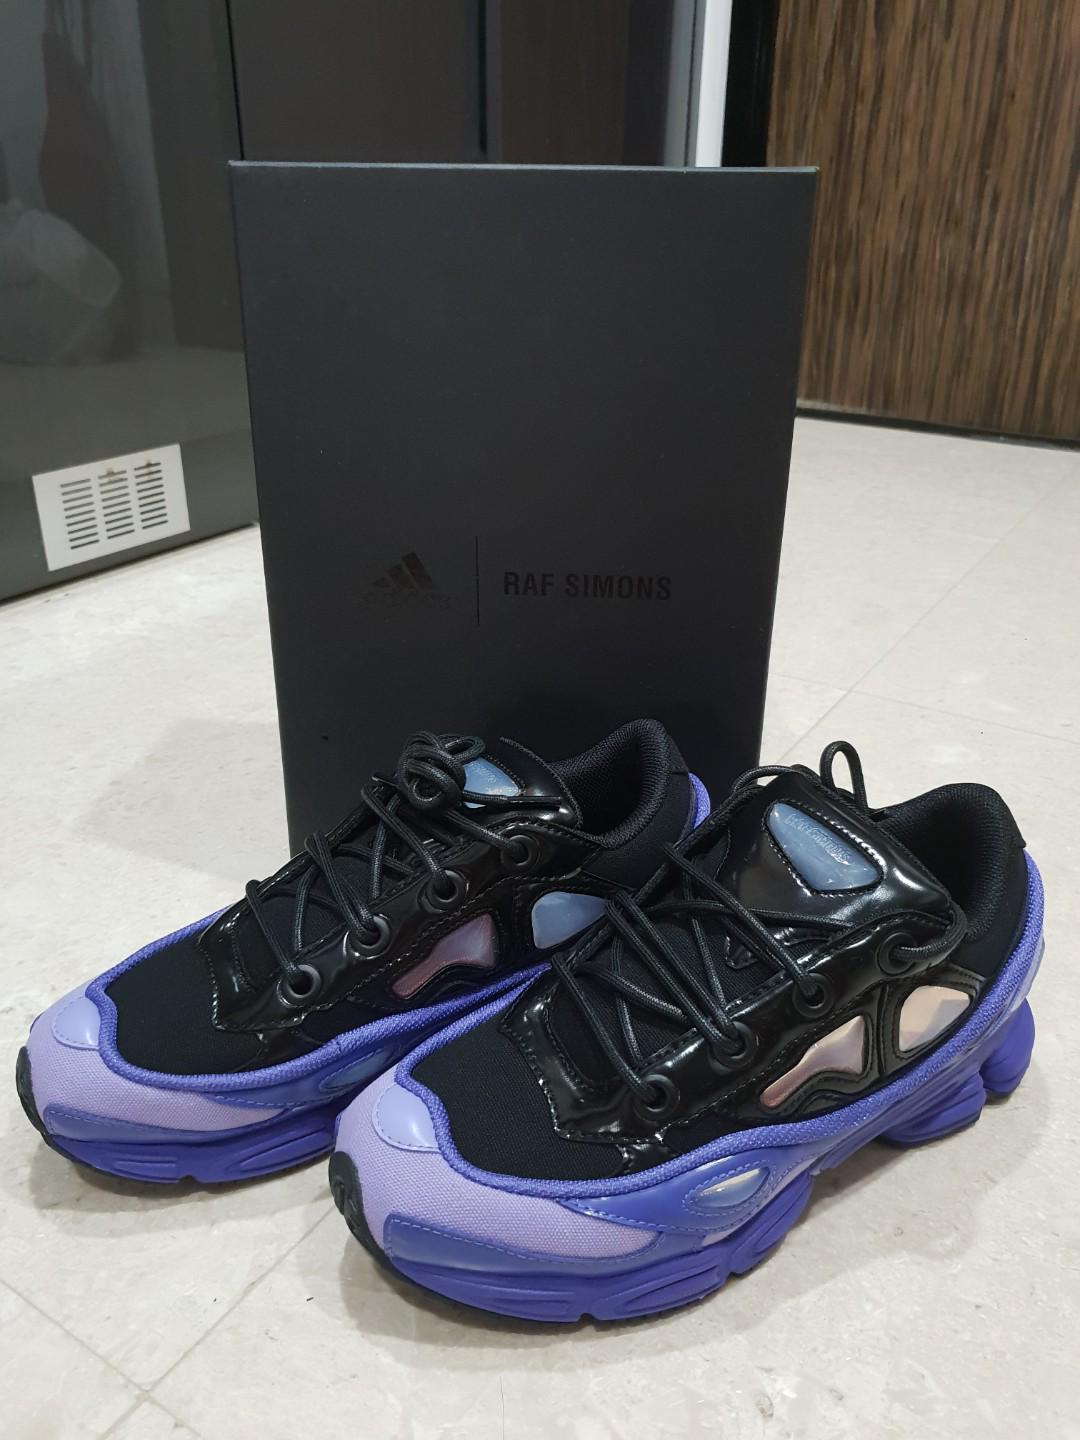 Adidas x Raf Simons Ozweego 3 US 7. Pls contact 91450272 to deal.  Lowballers will be ignored, Men's Fashion, Footwear, Sneakers on Carousell